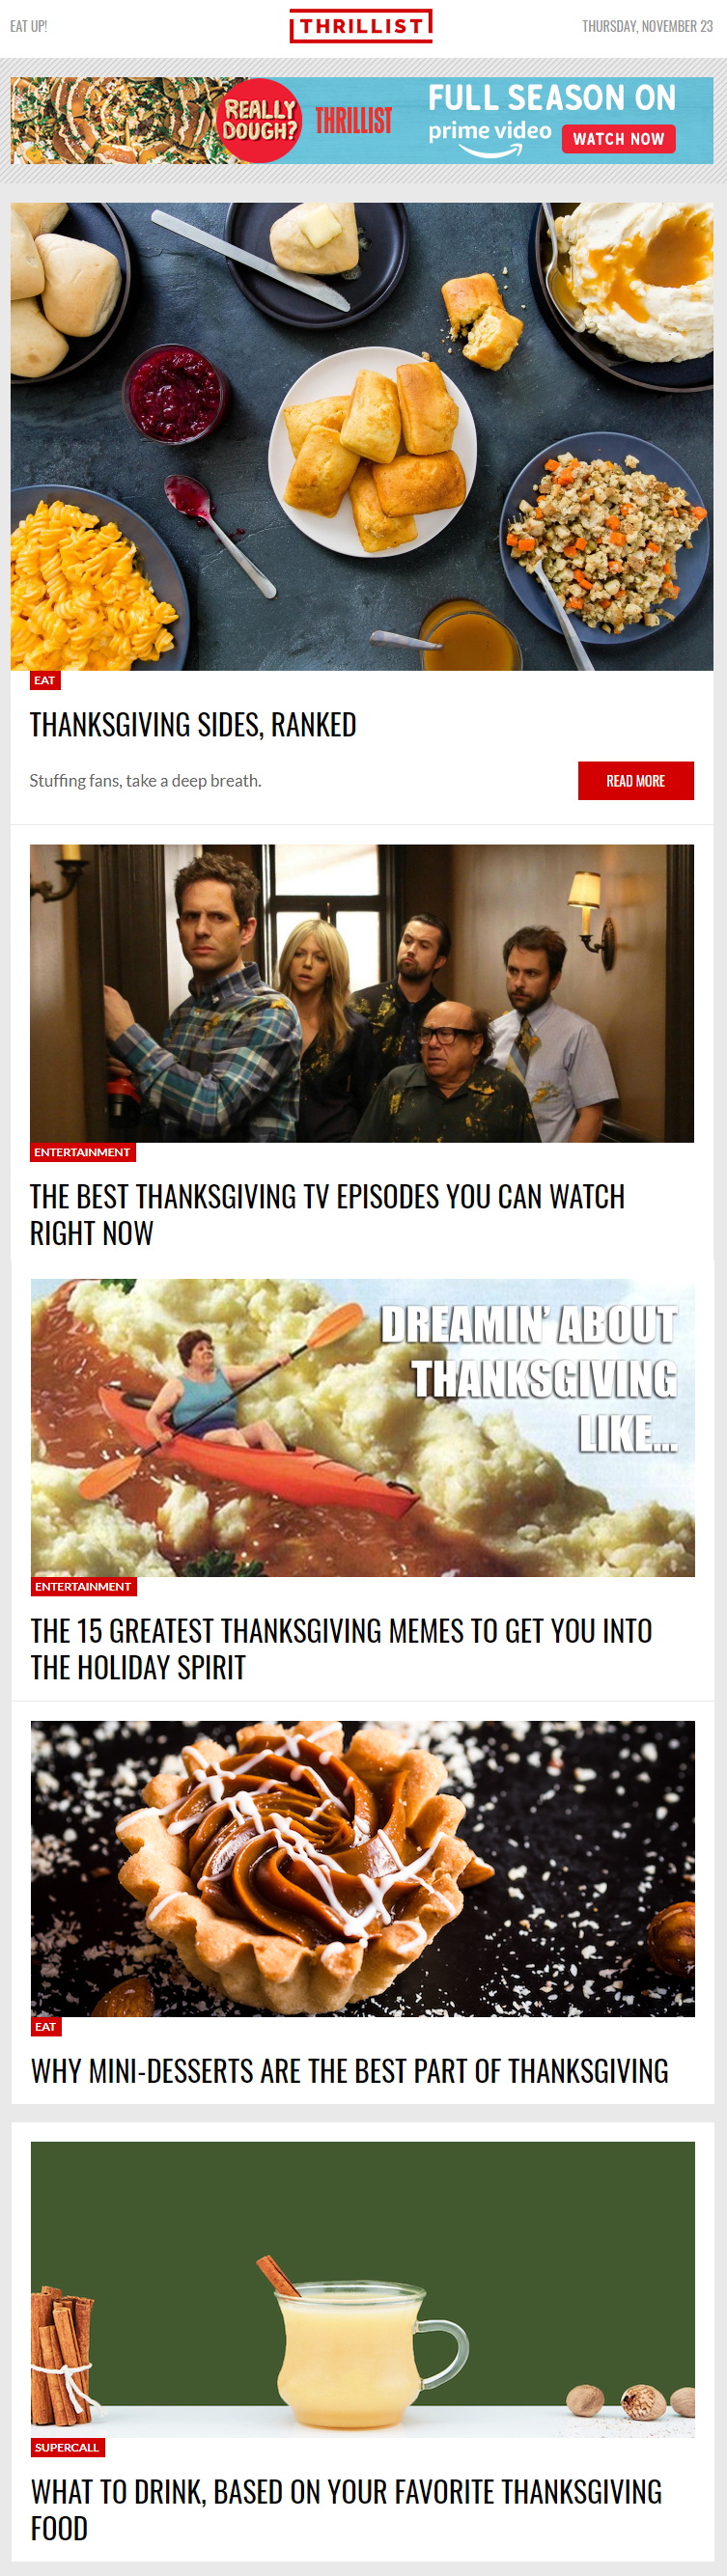 An email dedicated to Thanksgiving from Thrillist